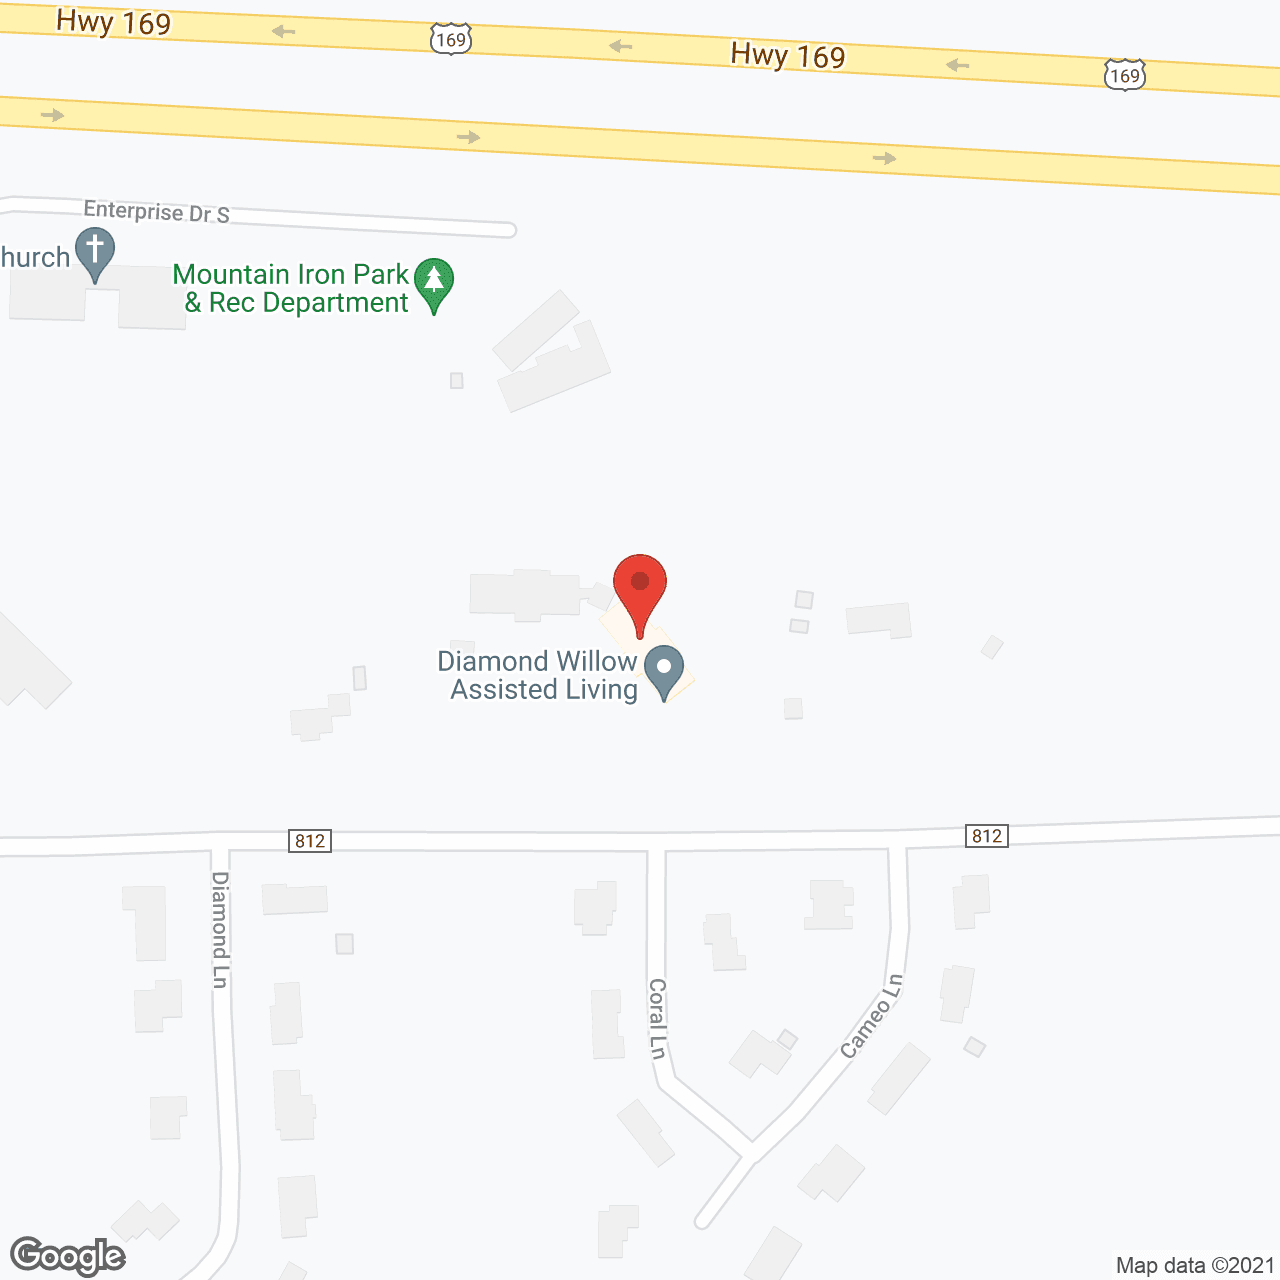 Diamond Willow Assisted Living of Mountain Iron in google map